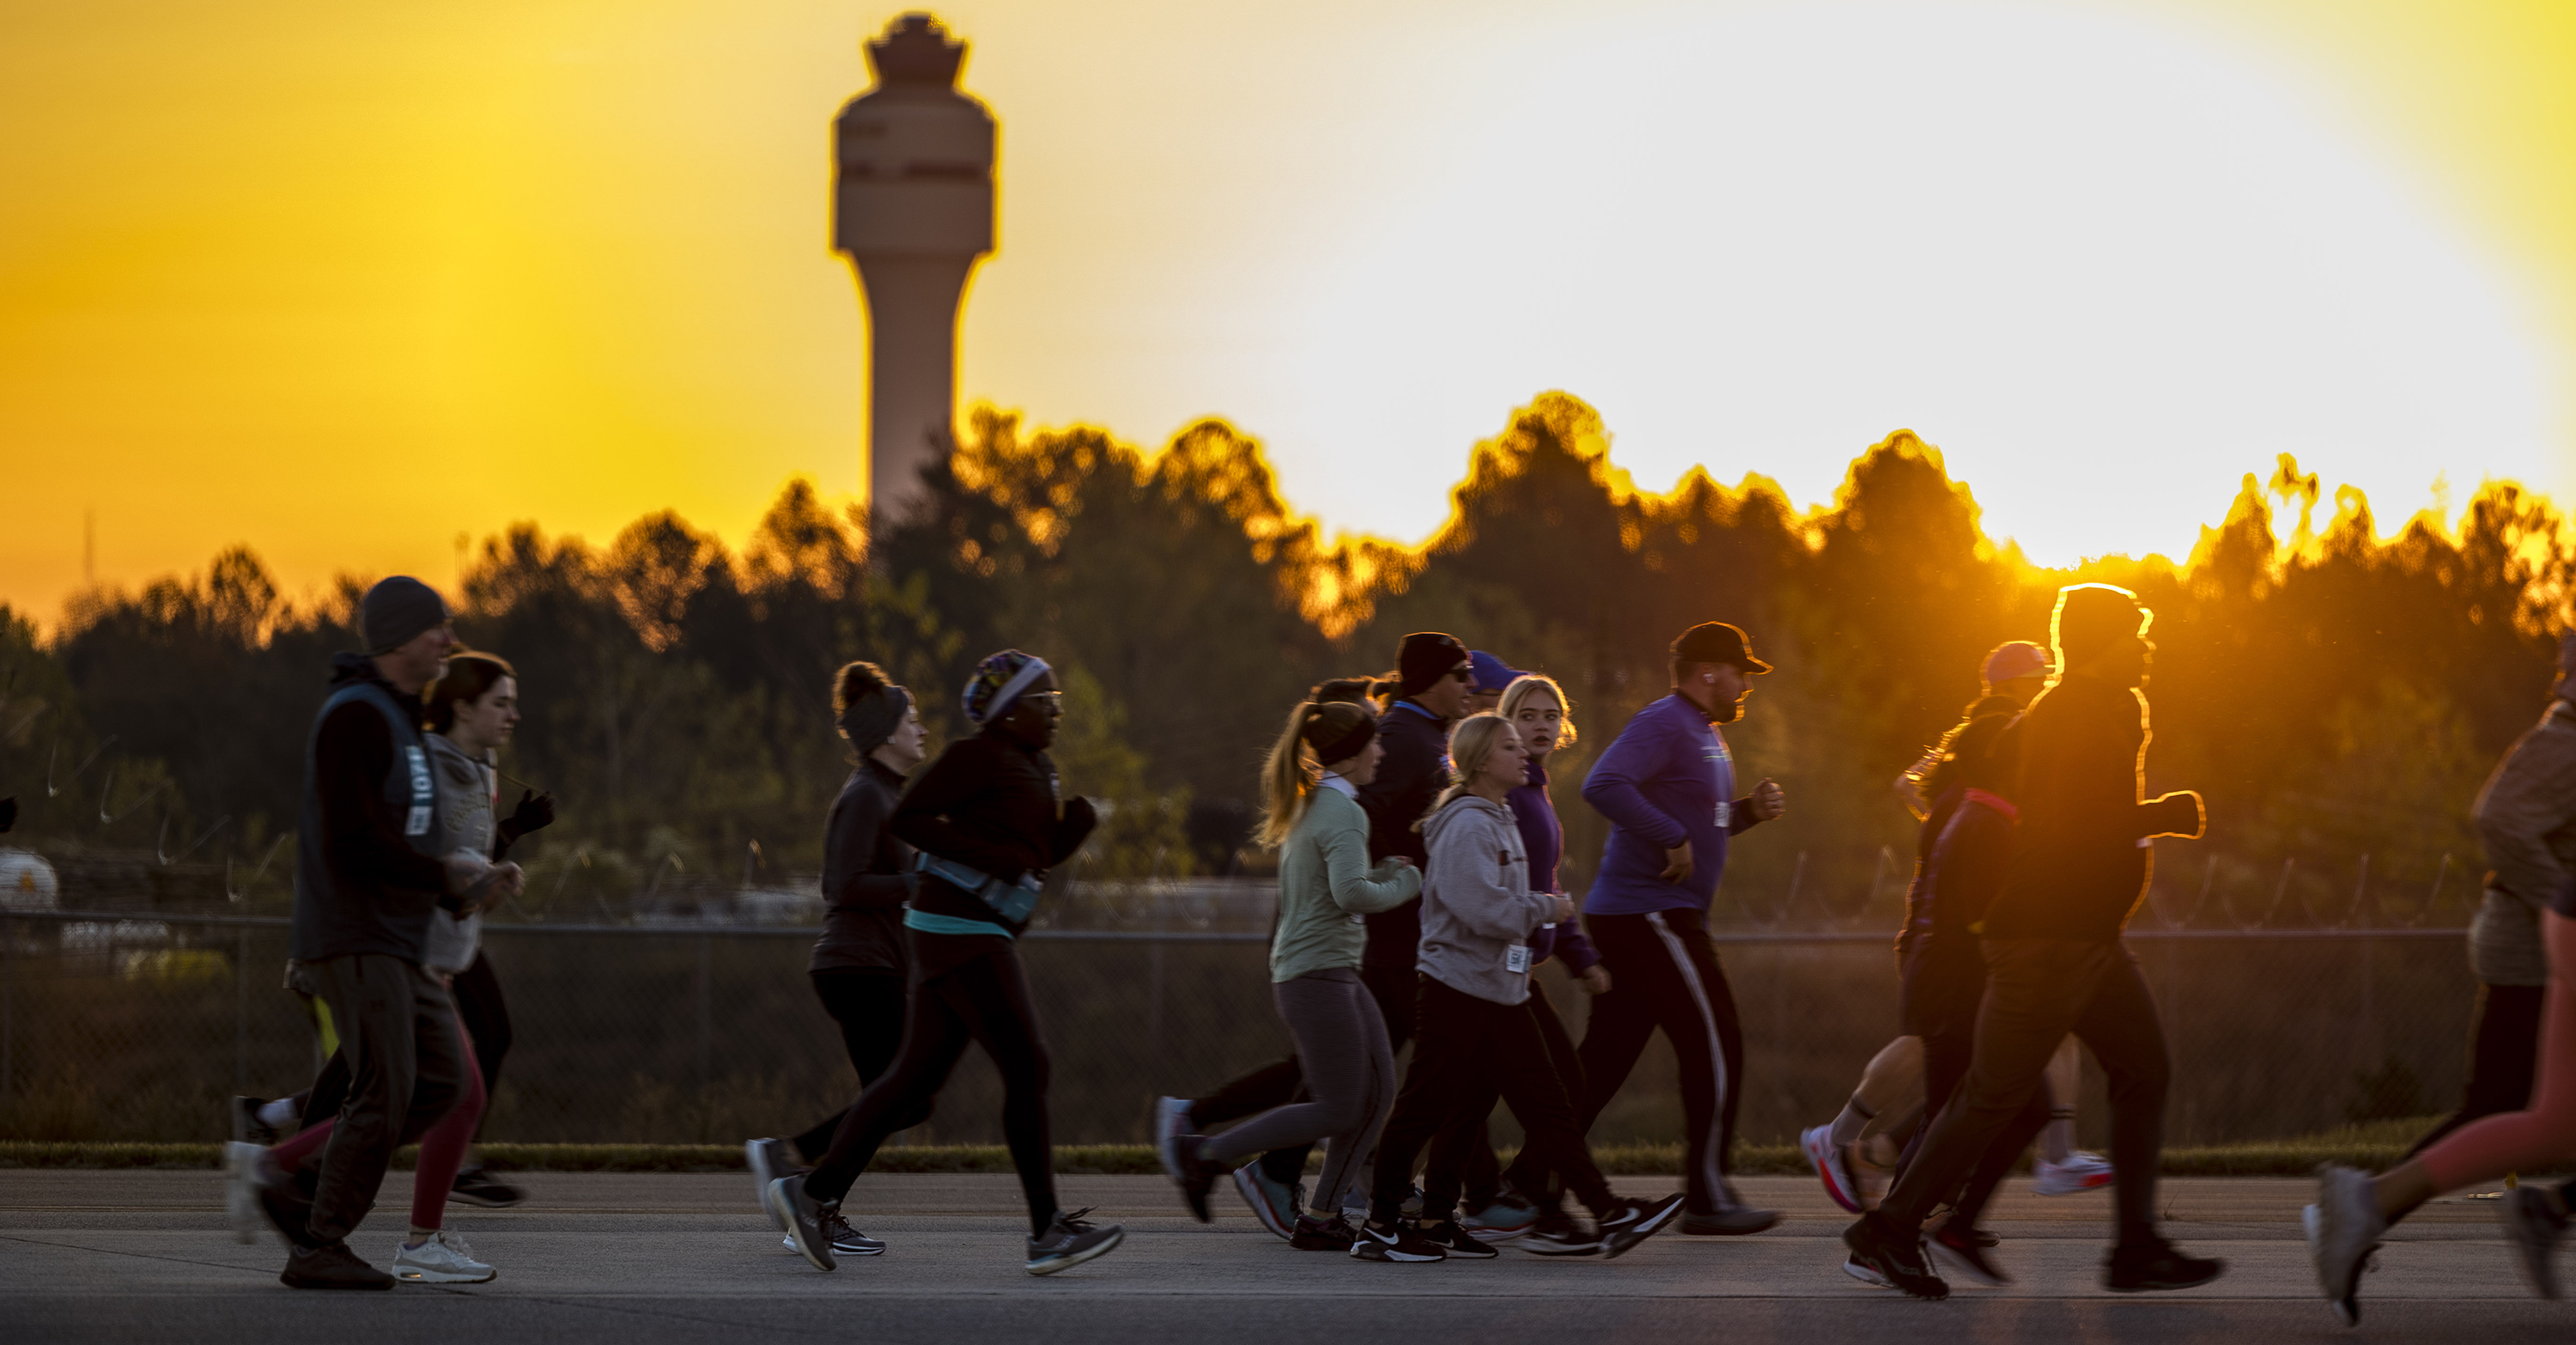 Runway 5K runners running on the airfield with early morning sunrise and FAA Tower in the background and trees